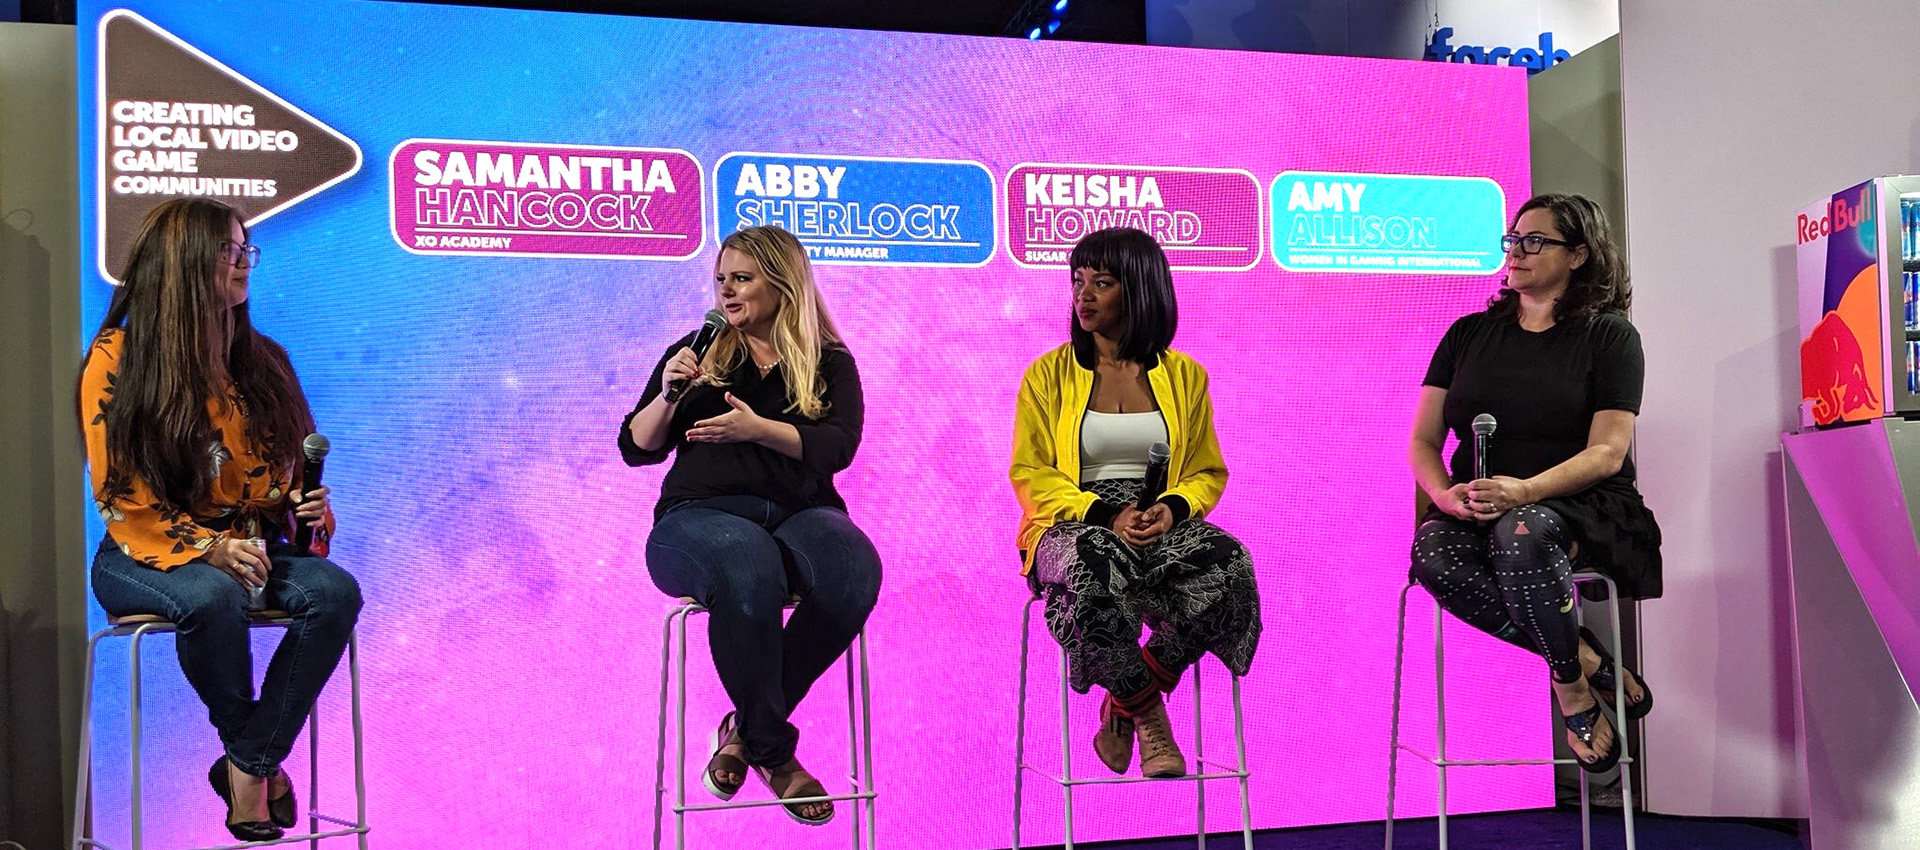 Abby Sherlock and three other women participating in a gaming panel discussion